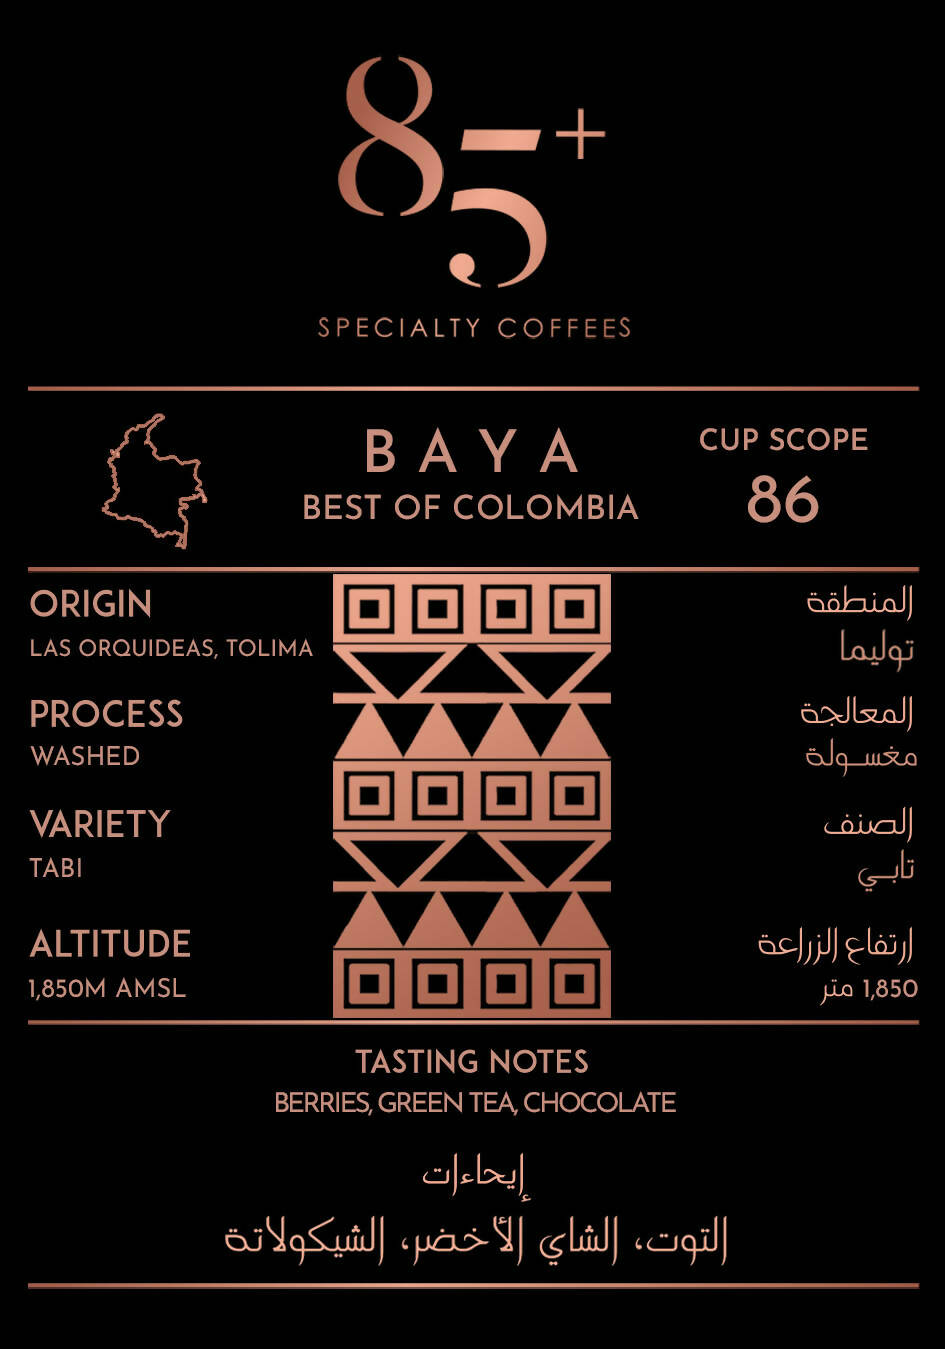 Colombia - BAYA | Cup Score 86 - BeanBurds 85+ Specialty Coffee